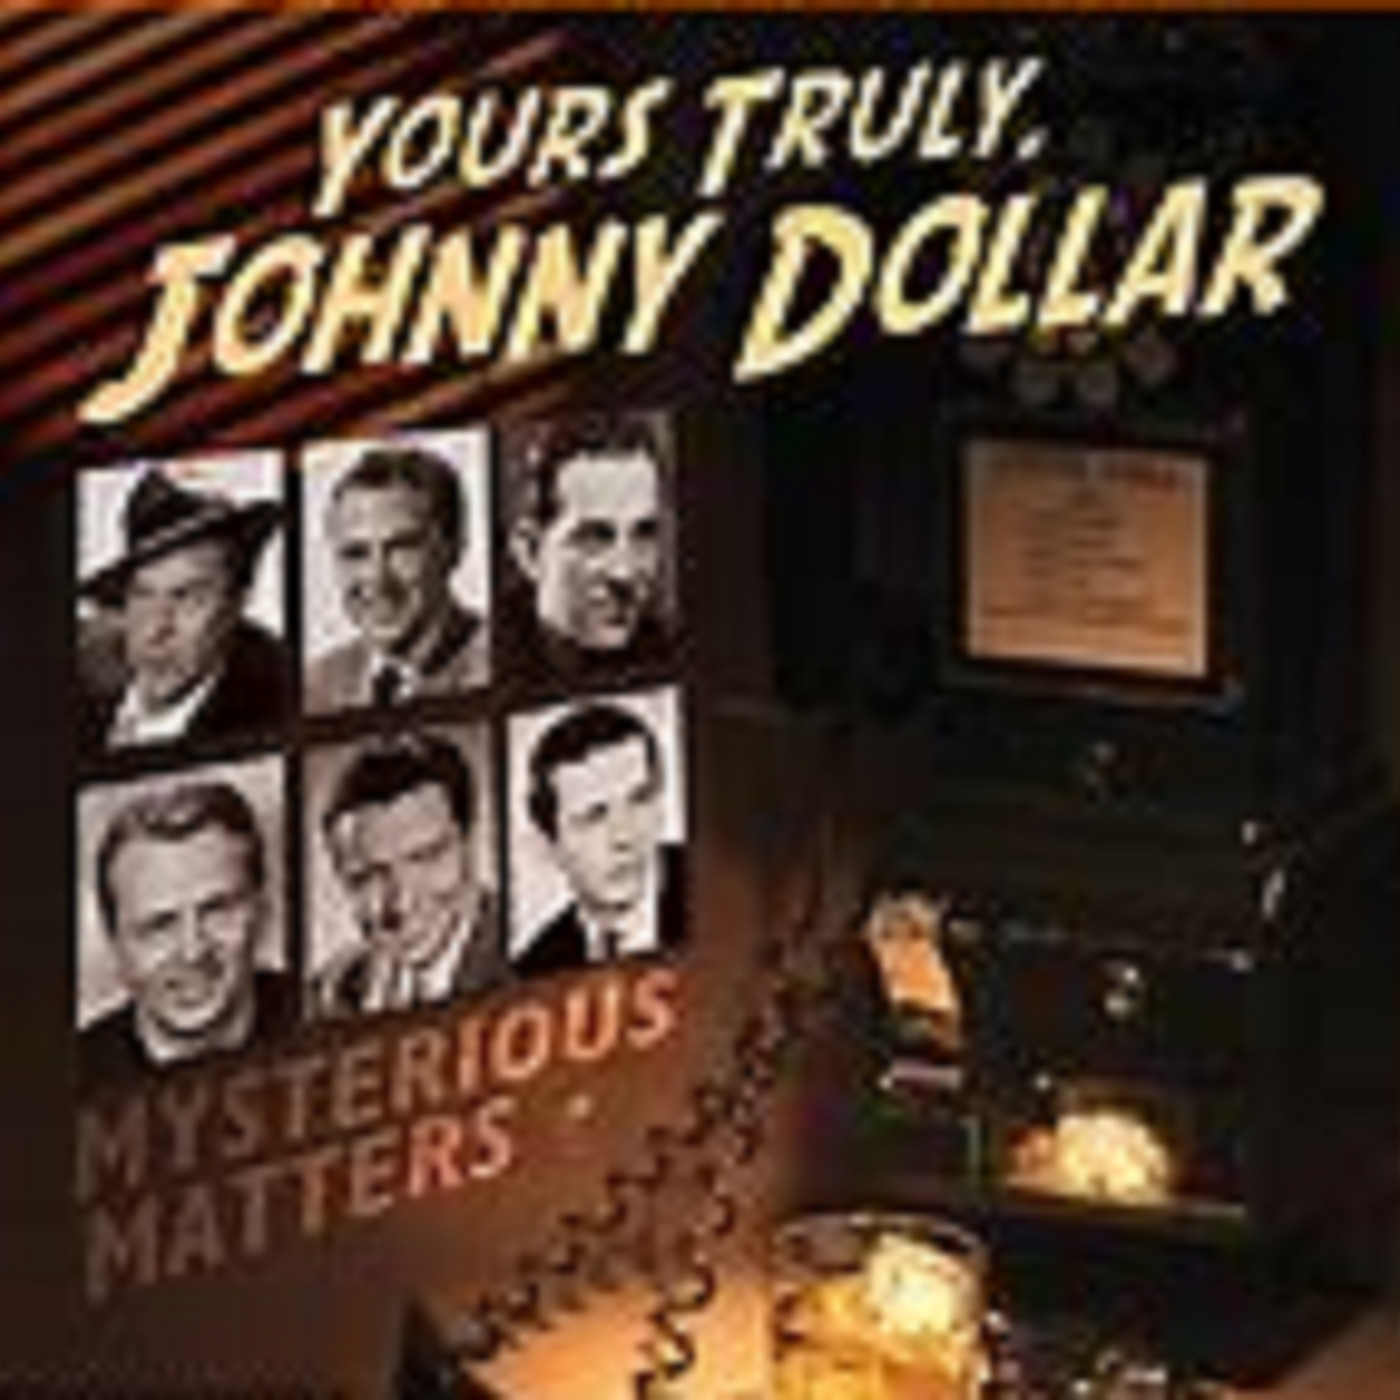 cover art for Yours Truly, Johnny Dollar - 092362, episode 810 - The Deadly Crystal Matter